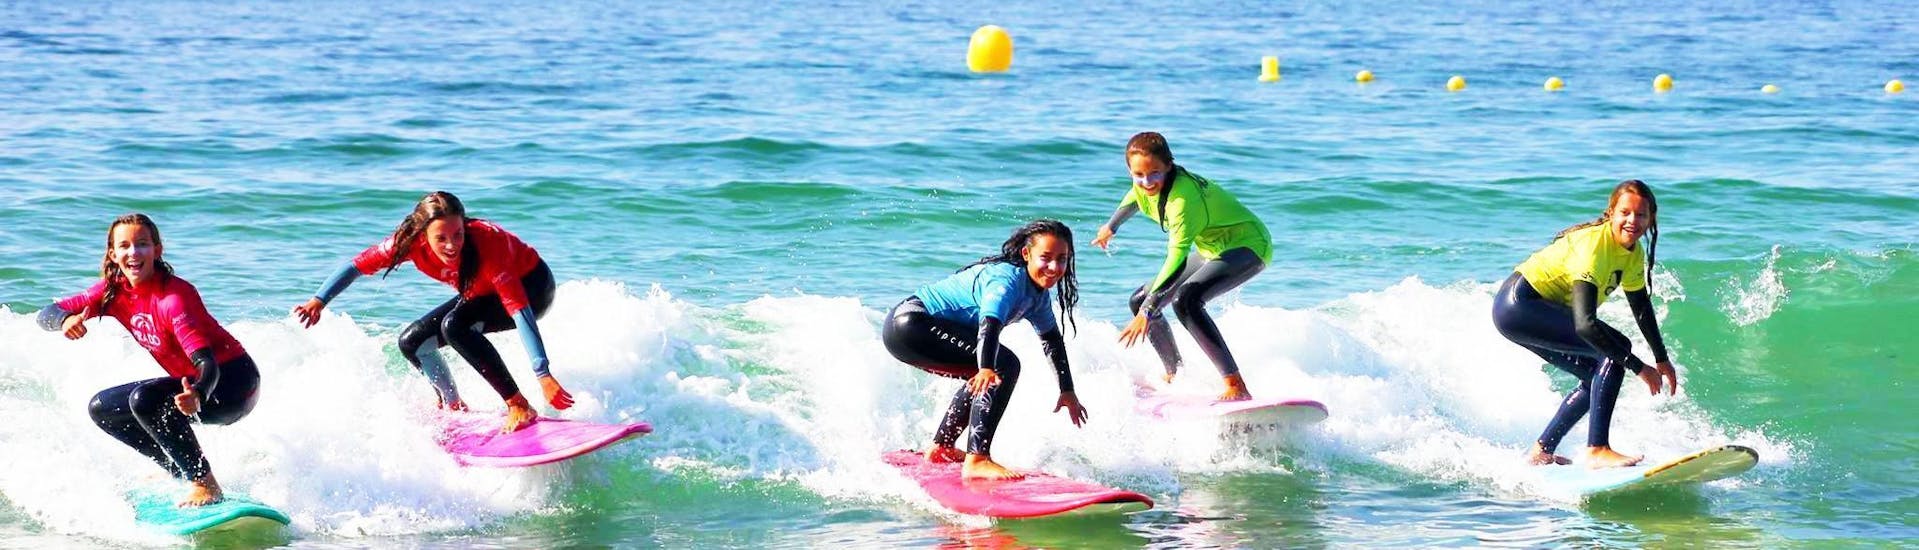 The participants of the Surfing Lessons at Playa de Patos for All Levels & Ages organized by Prado Surf Patos give their best in the water.